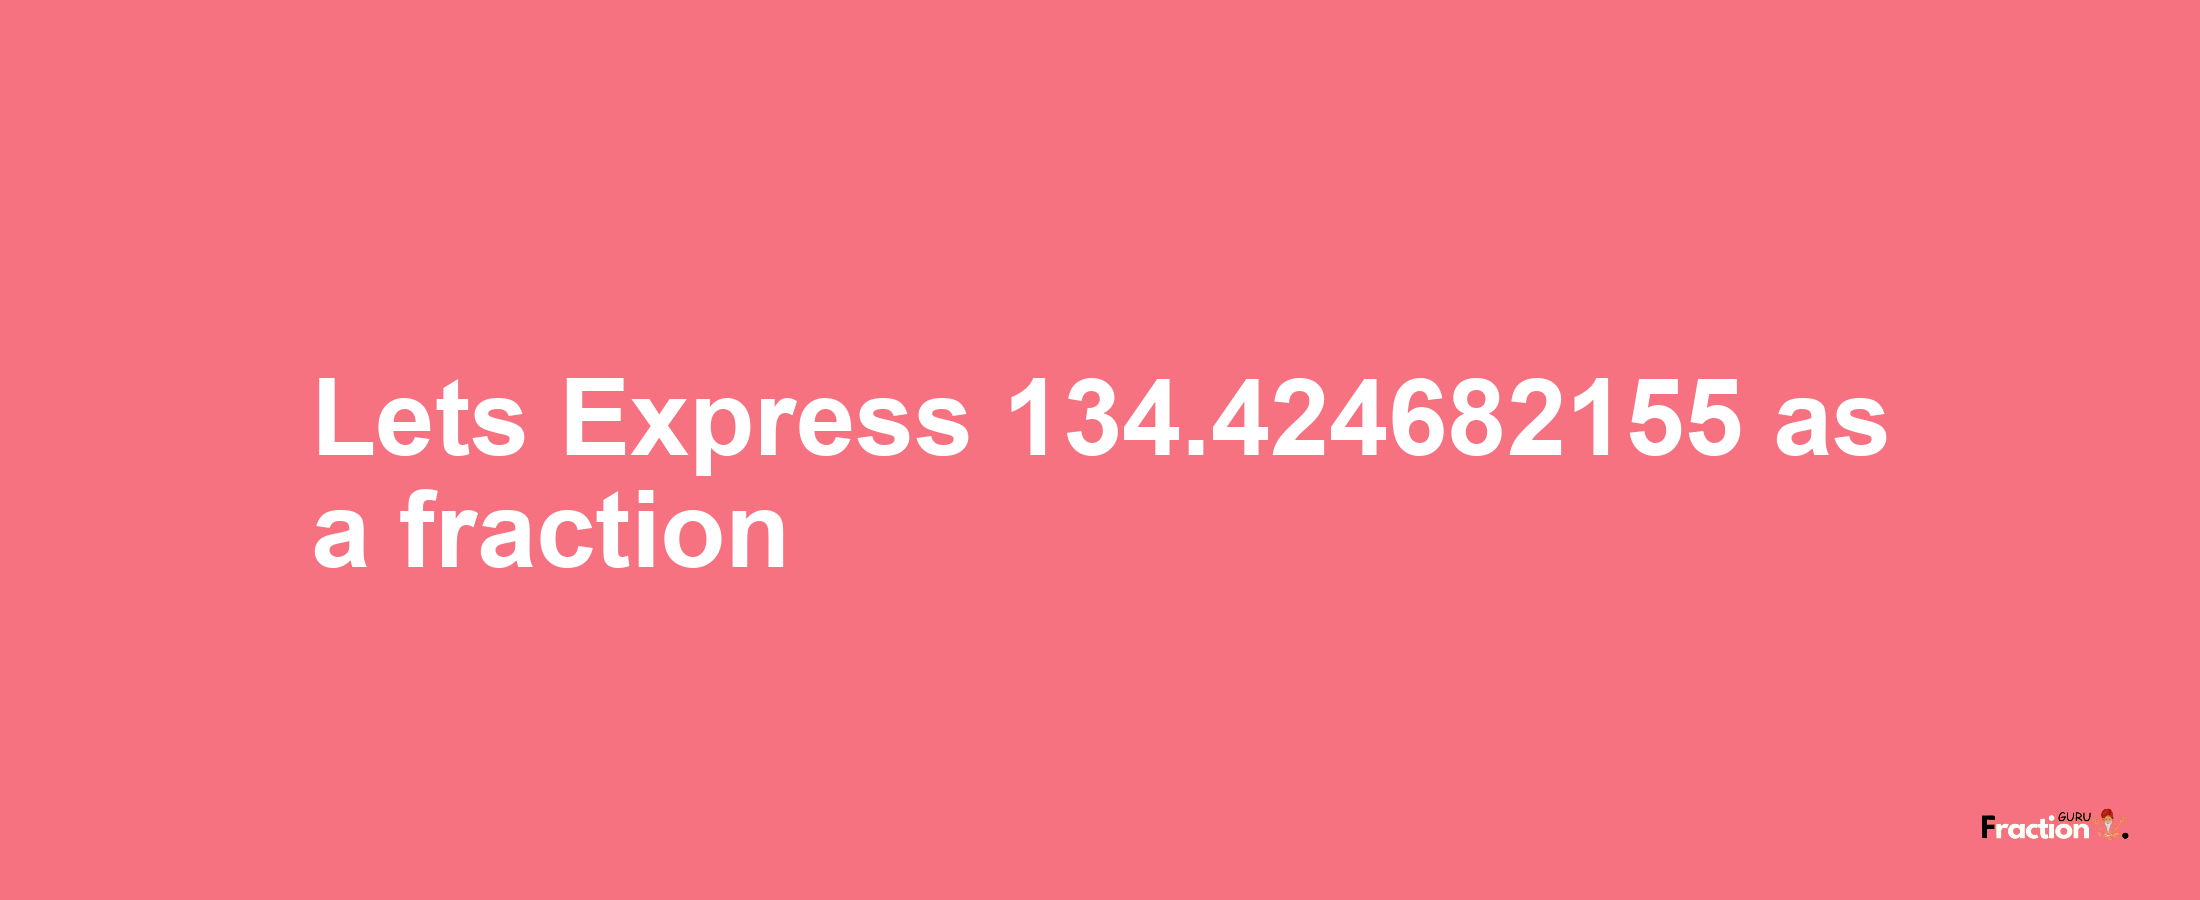 Lets Express 134.424682155 as afraction